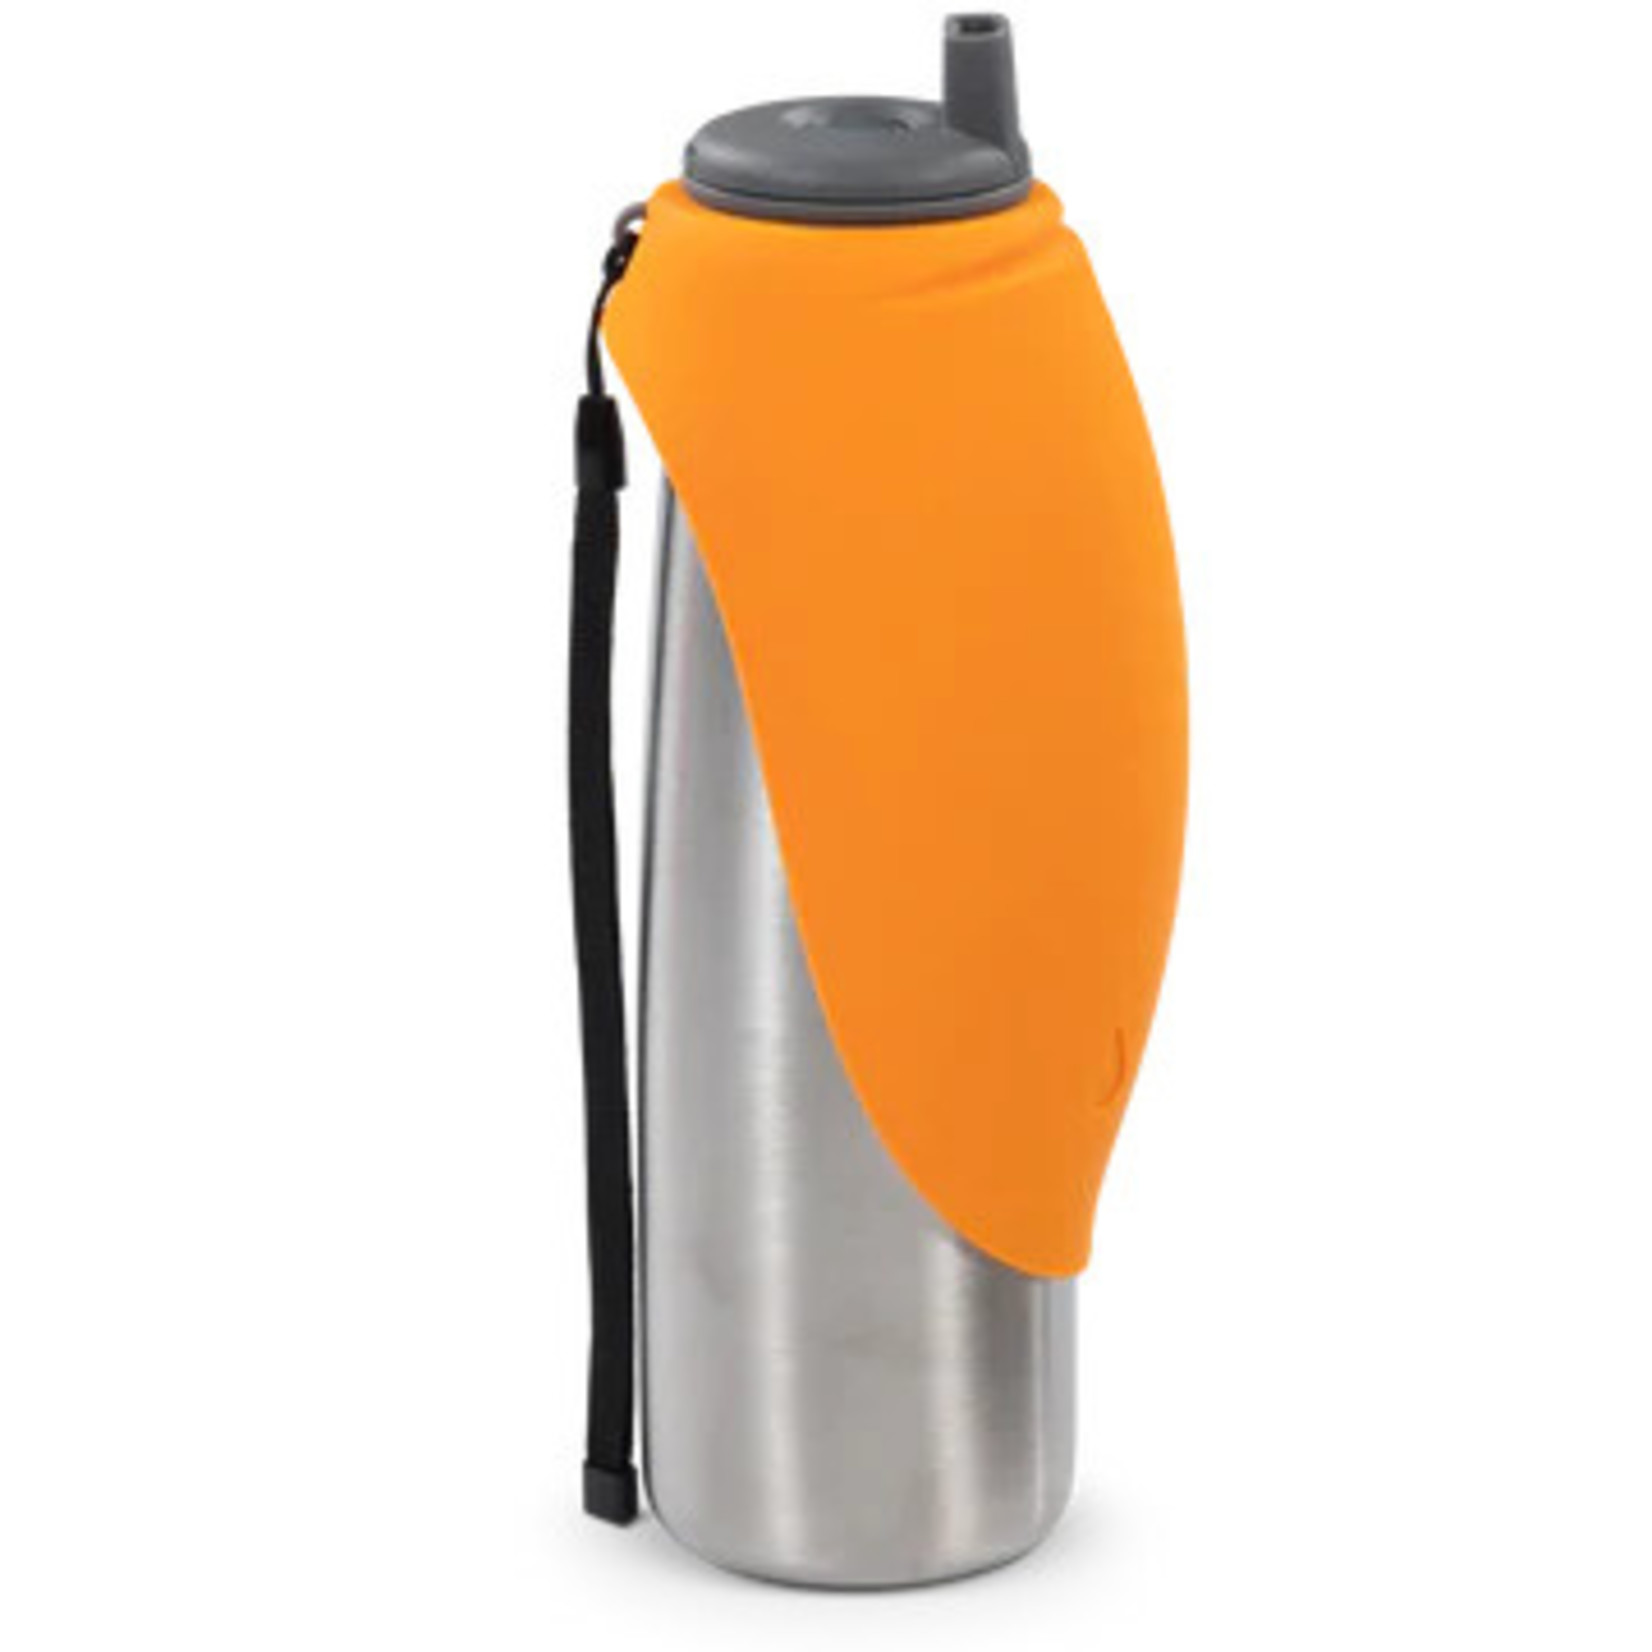 Messy Mutts Messy Mutts Stainless Steel Double-Insulated Travel Water Bottle/Bowl Orange 20oz